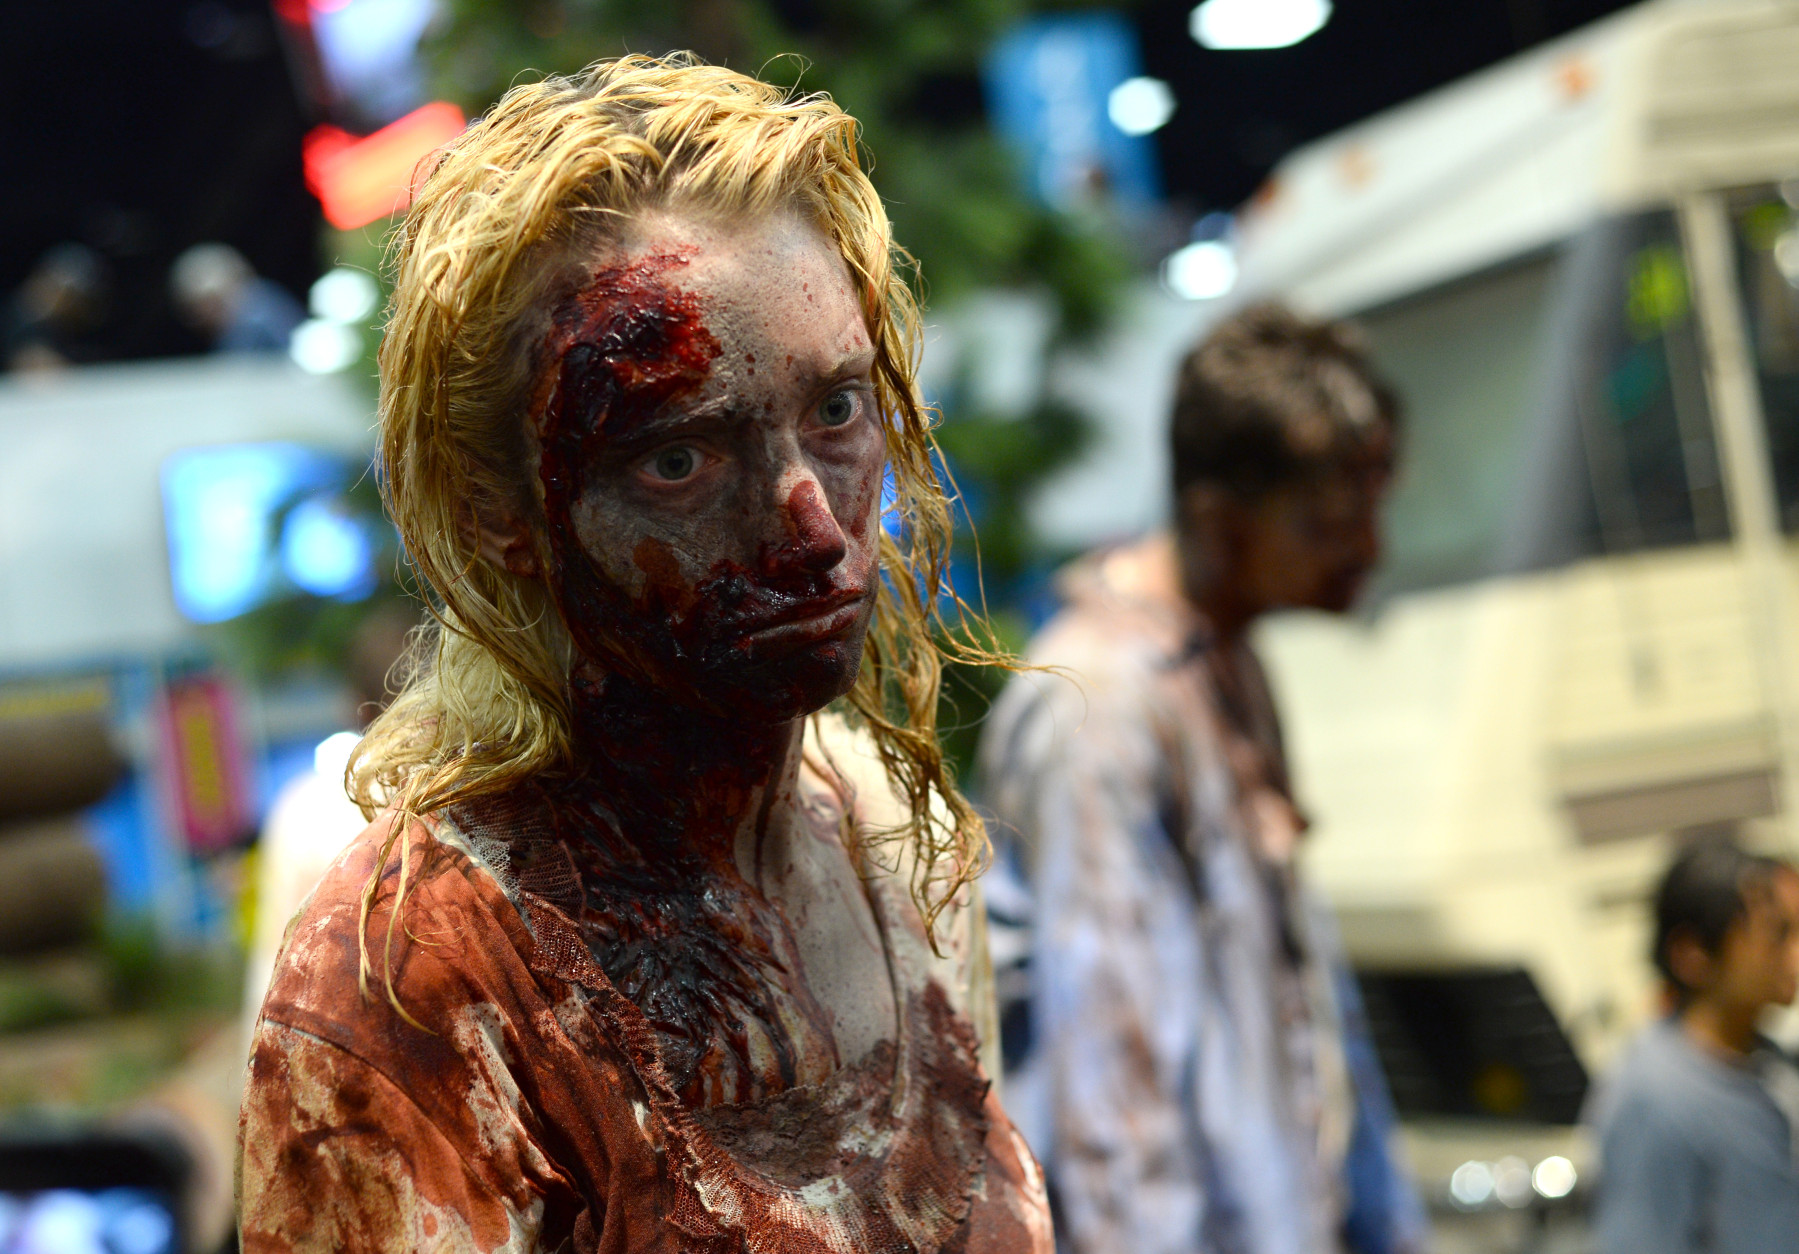 A fan dresses as a zombie on day 3 of Comic-Con International on Saturday, July 23, 2016, in San Diego. (Photo by Al Powers/Invision/AP)